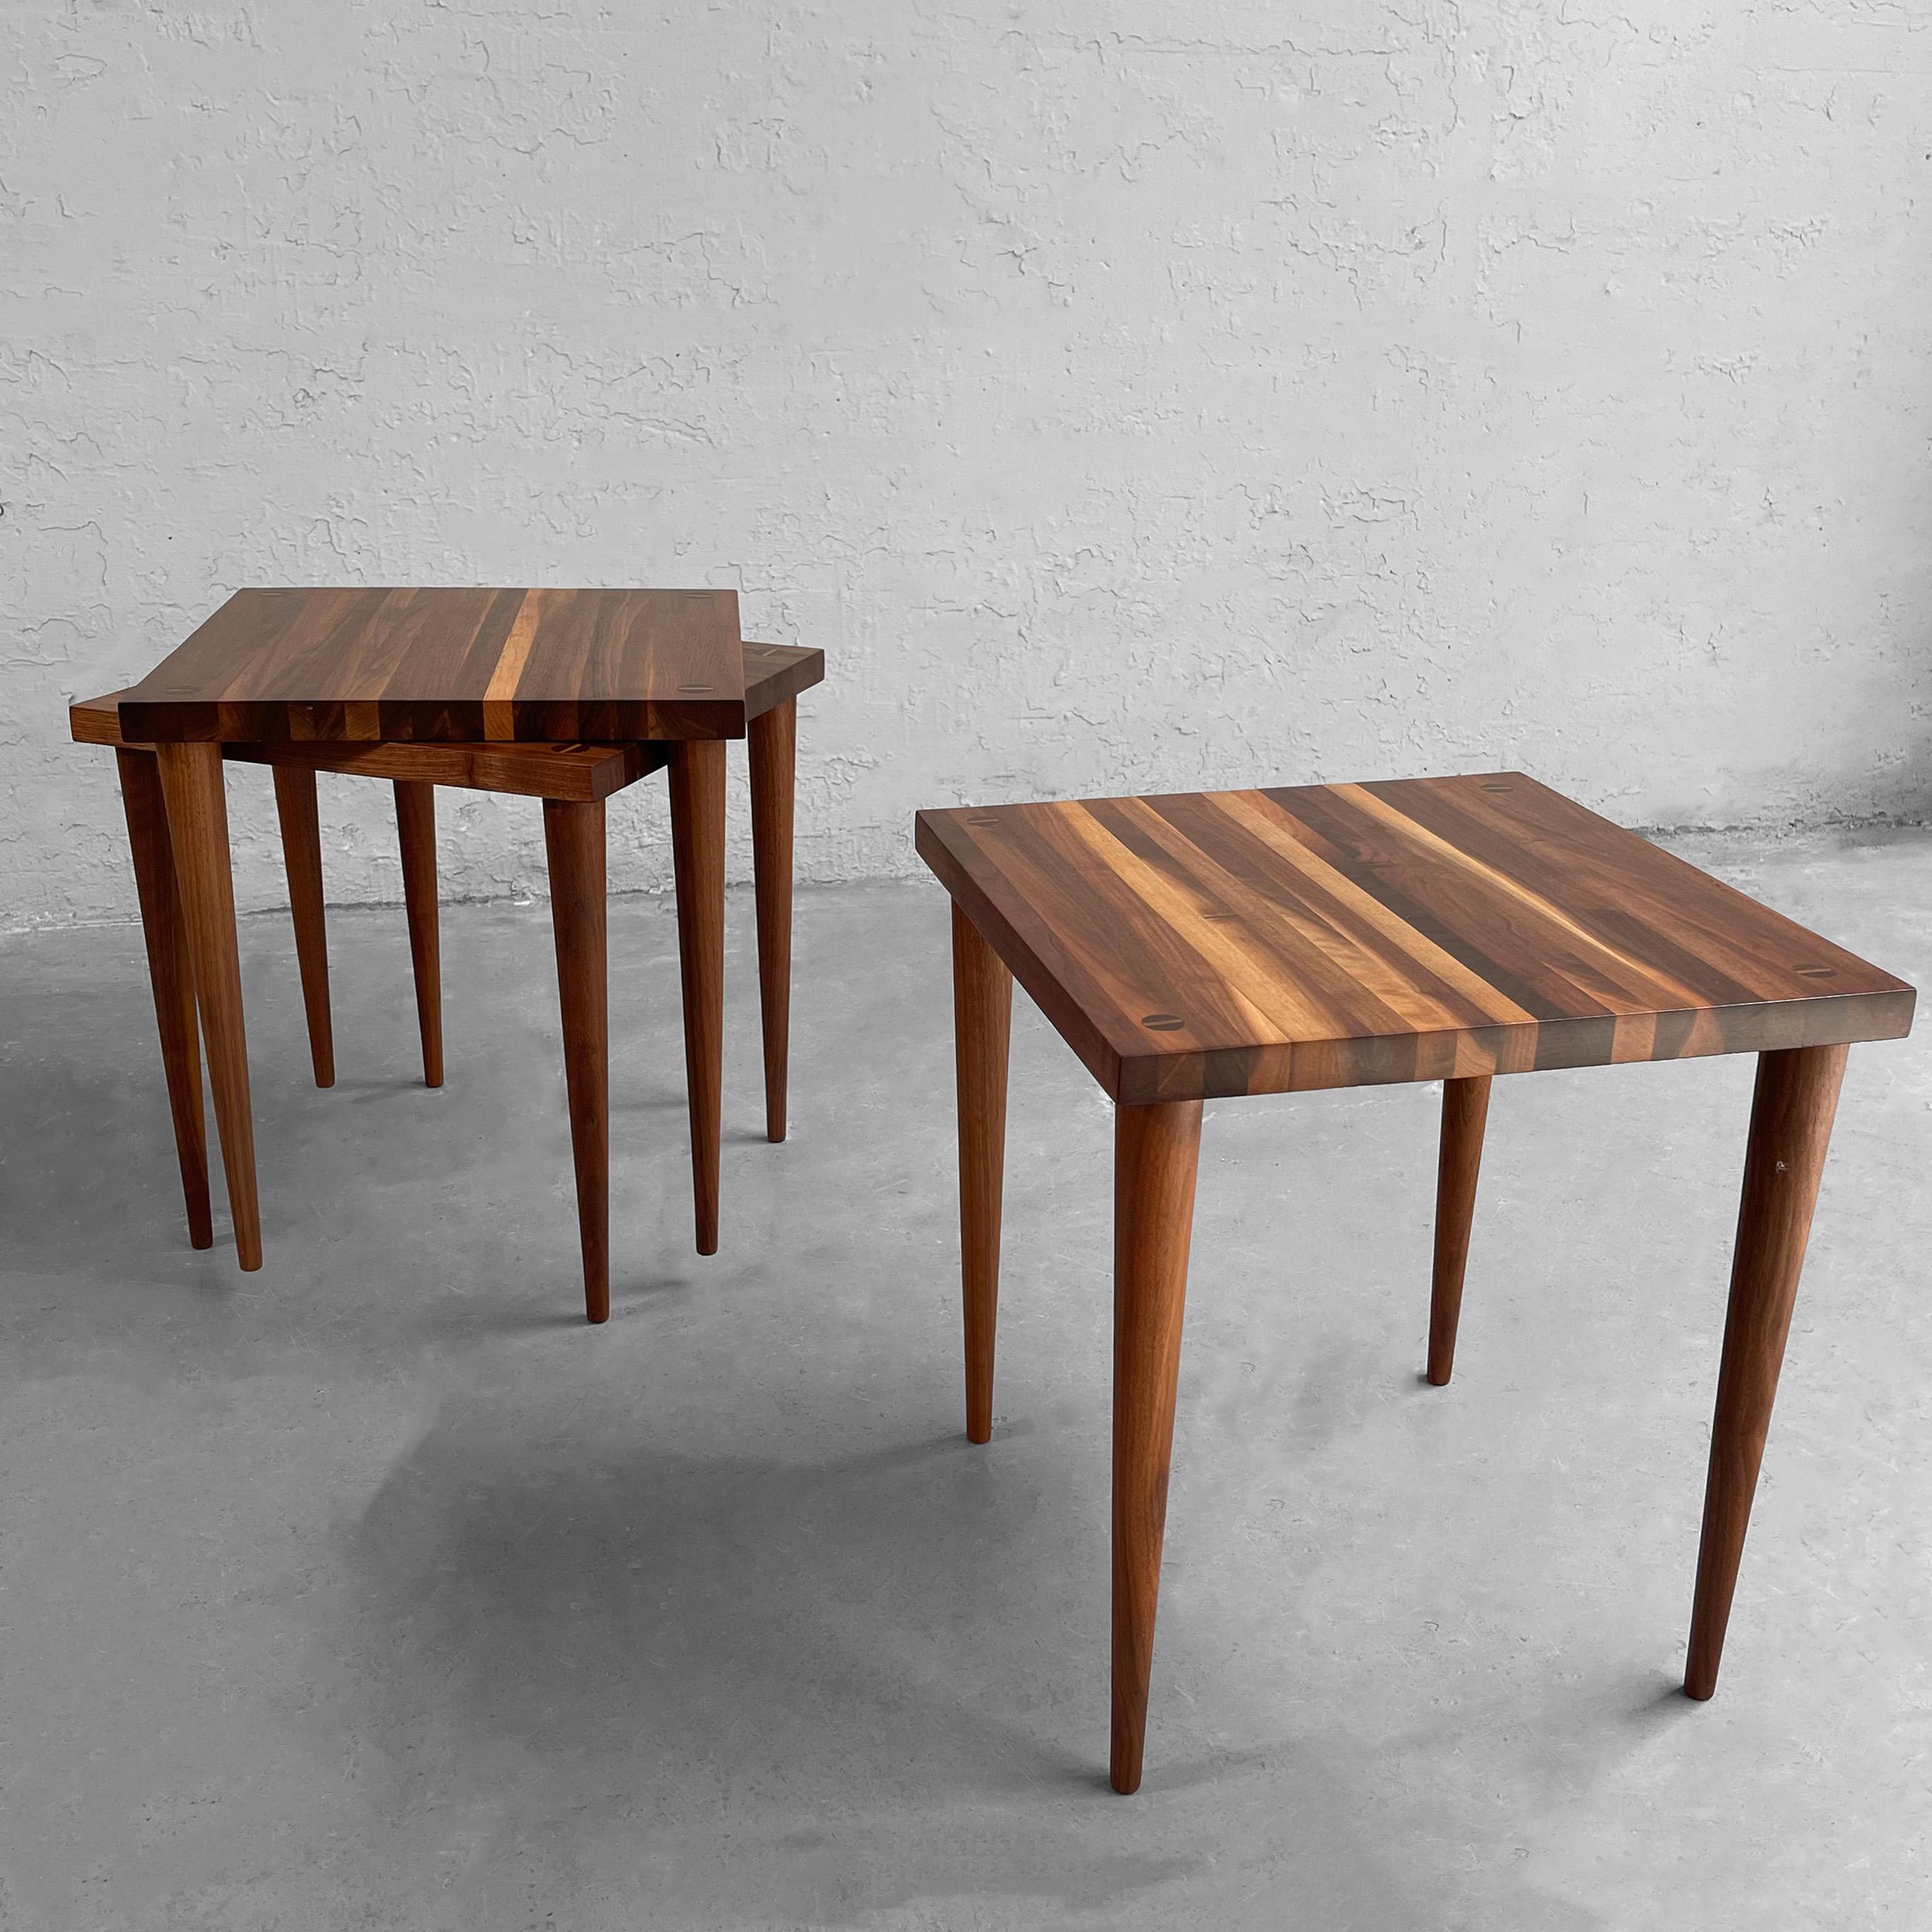 Trio of petite, Mid-Century Modern, walnut block, tapered leg, stacking tables by Mel Smilow for Smilow-Thielle can be stacked together, used as occasional side tables or continuously as a coffee table.